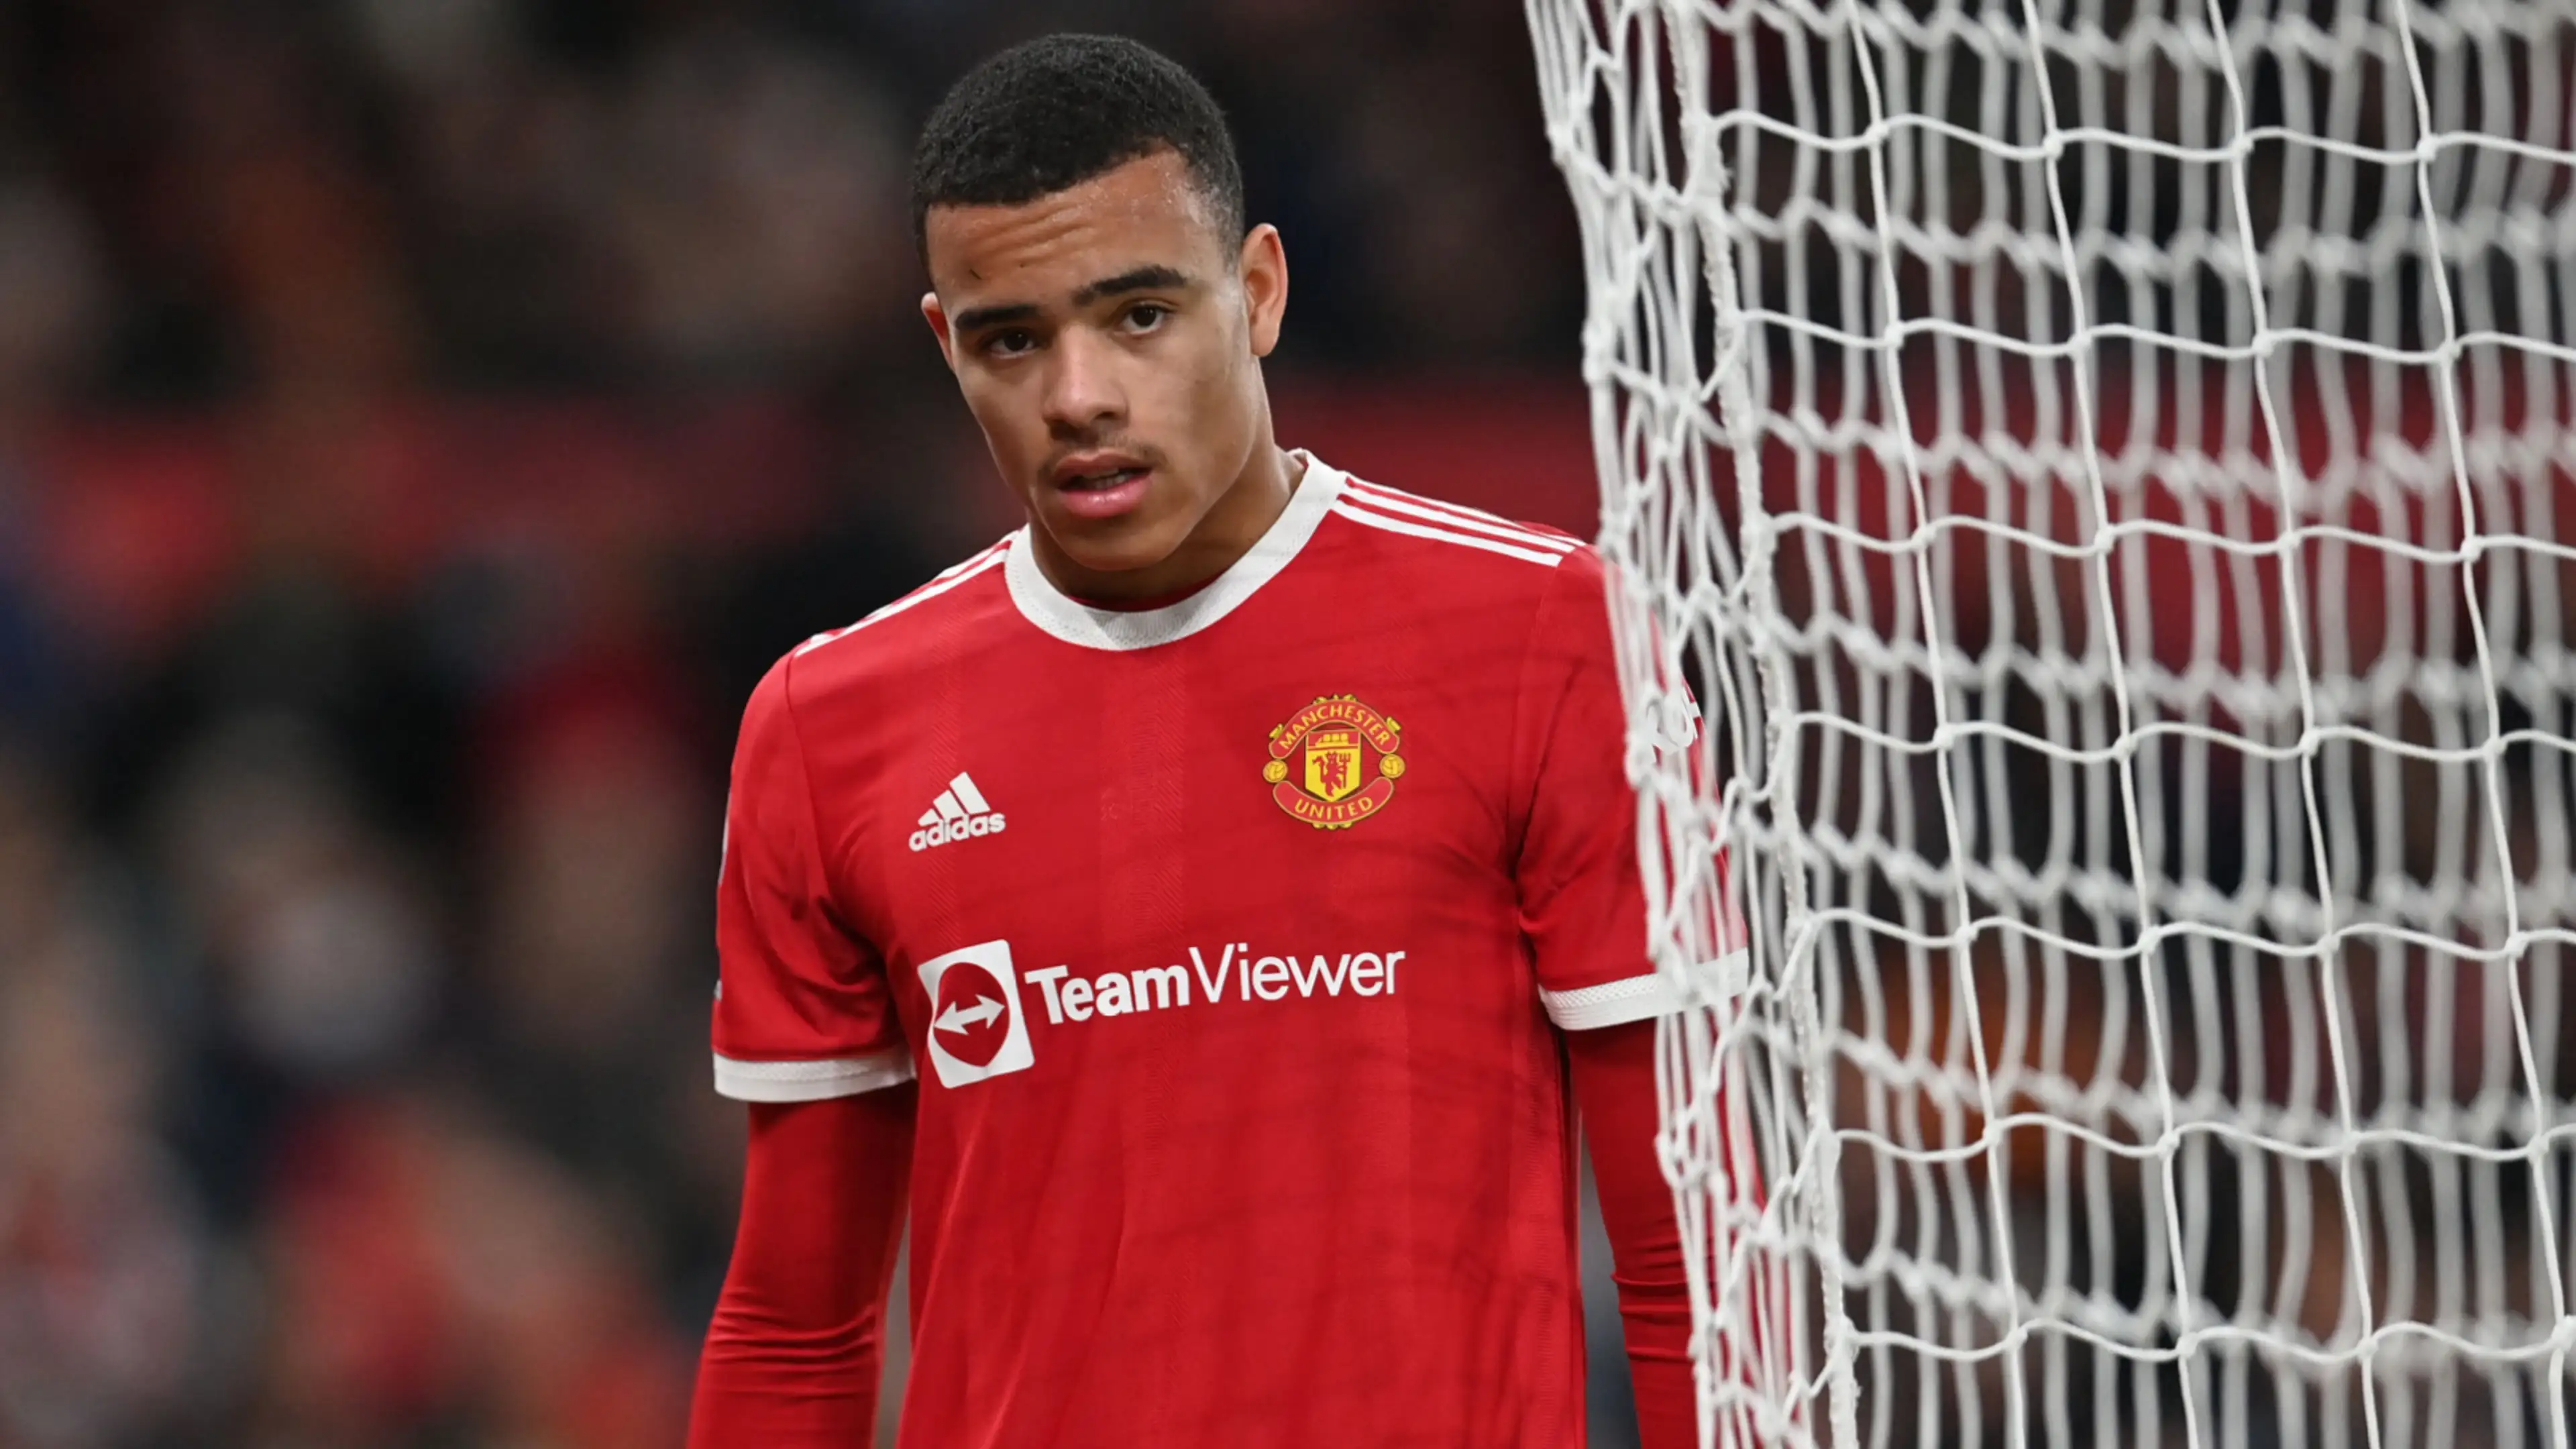 Man Utd Ends Contract With Striker Mason Greenwood